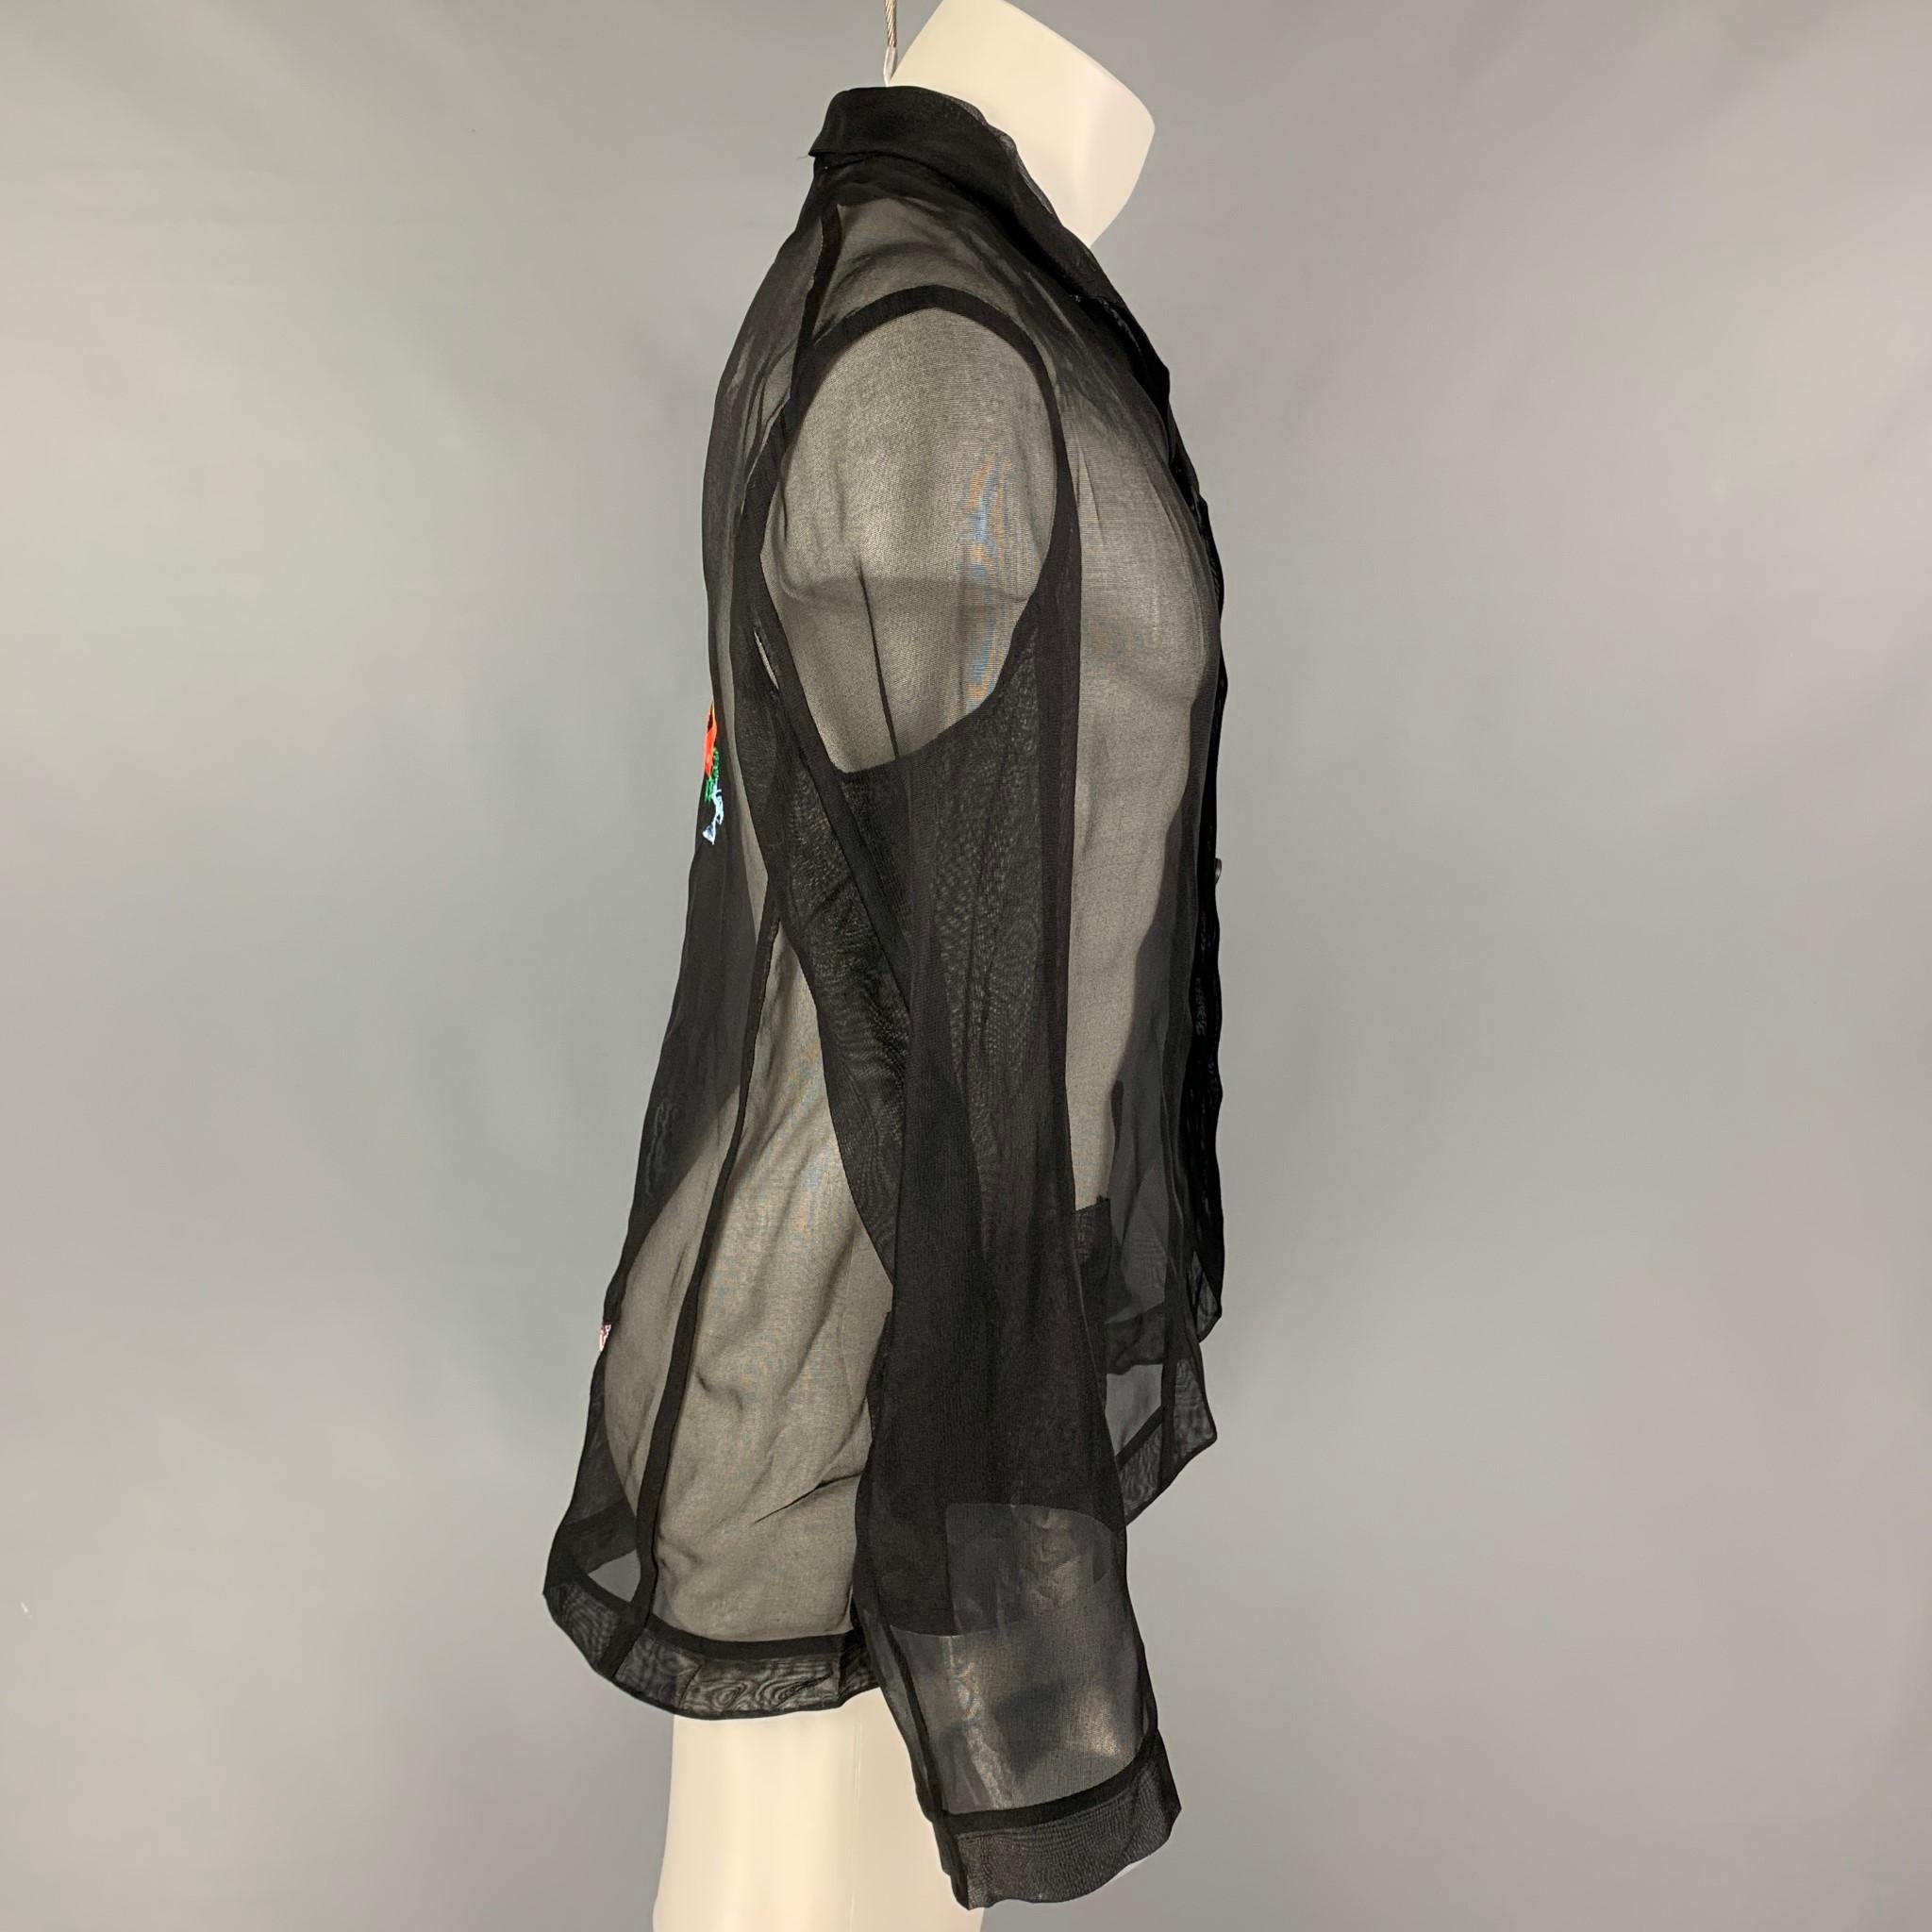 WALTER VAN BEIRENDONCK jacket comes in a black see through silk featuring a back multi-color embroidered design, notch lapel, patch pockets, and a buttoned closure. Made in Belgium.

Excellent Pre-Owned Condition.
Marked: